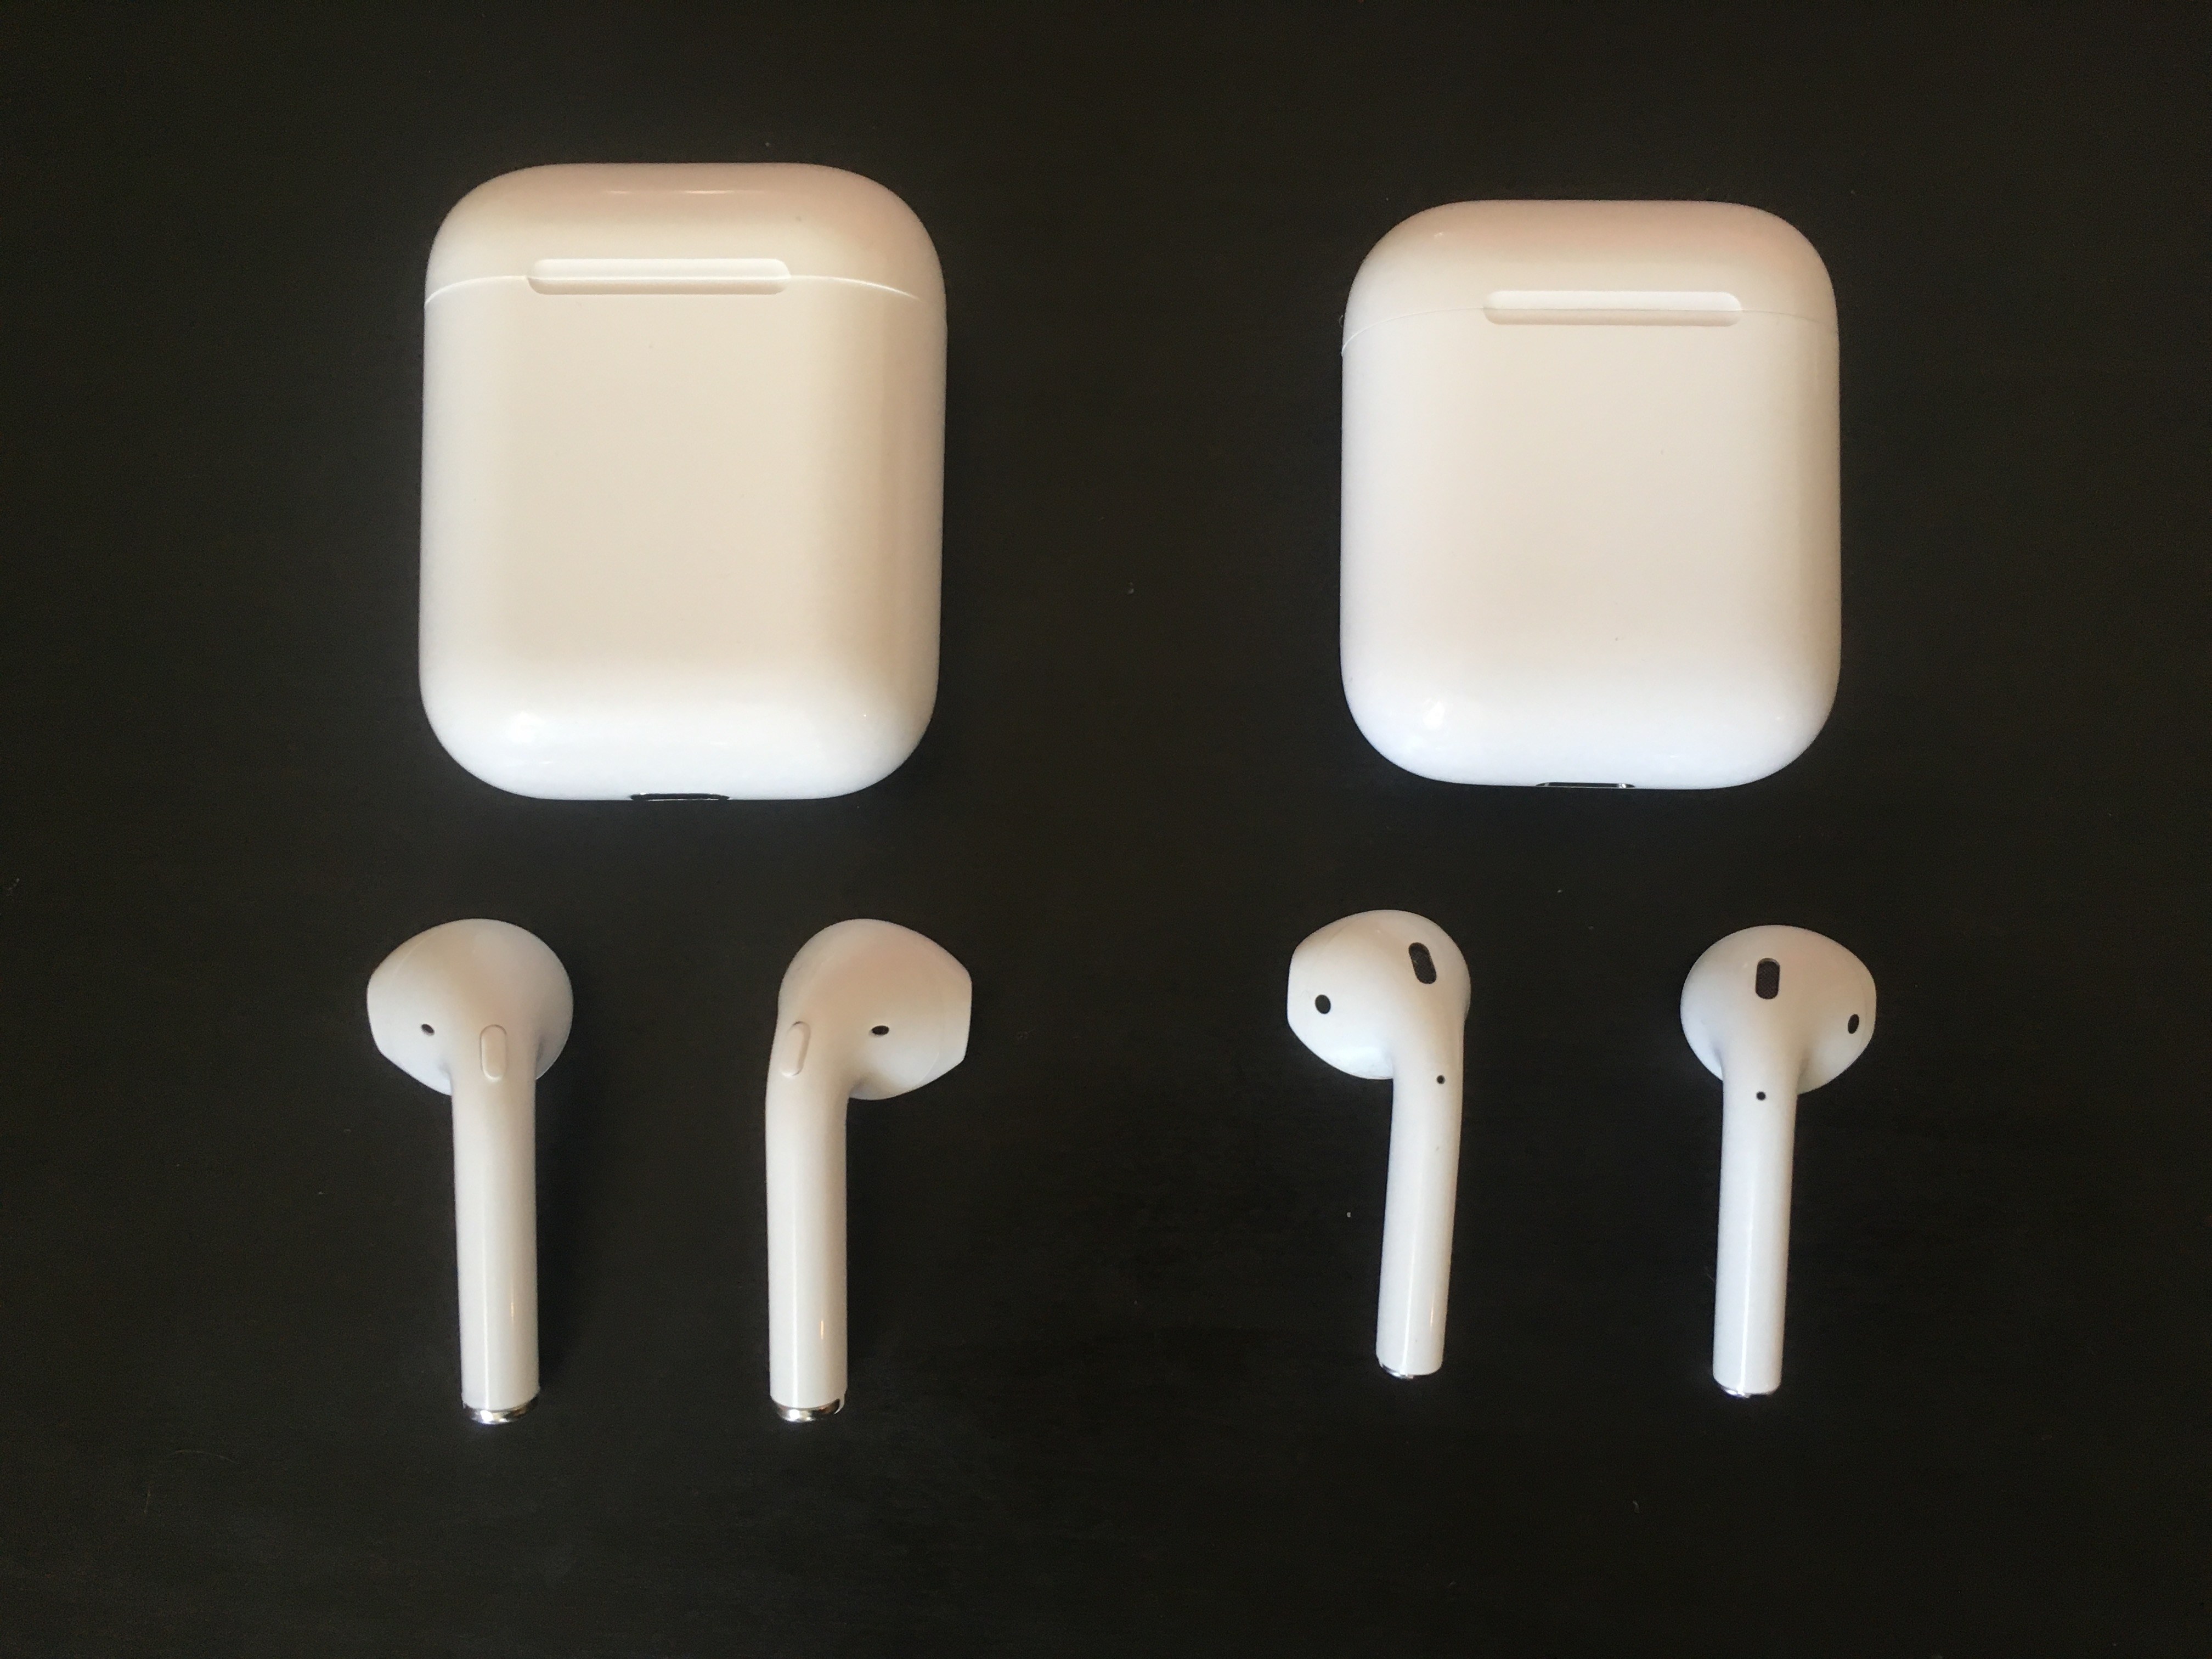 w1 chip fake airpods